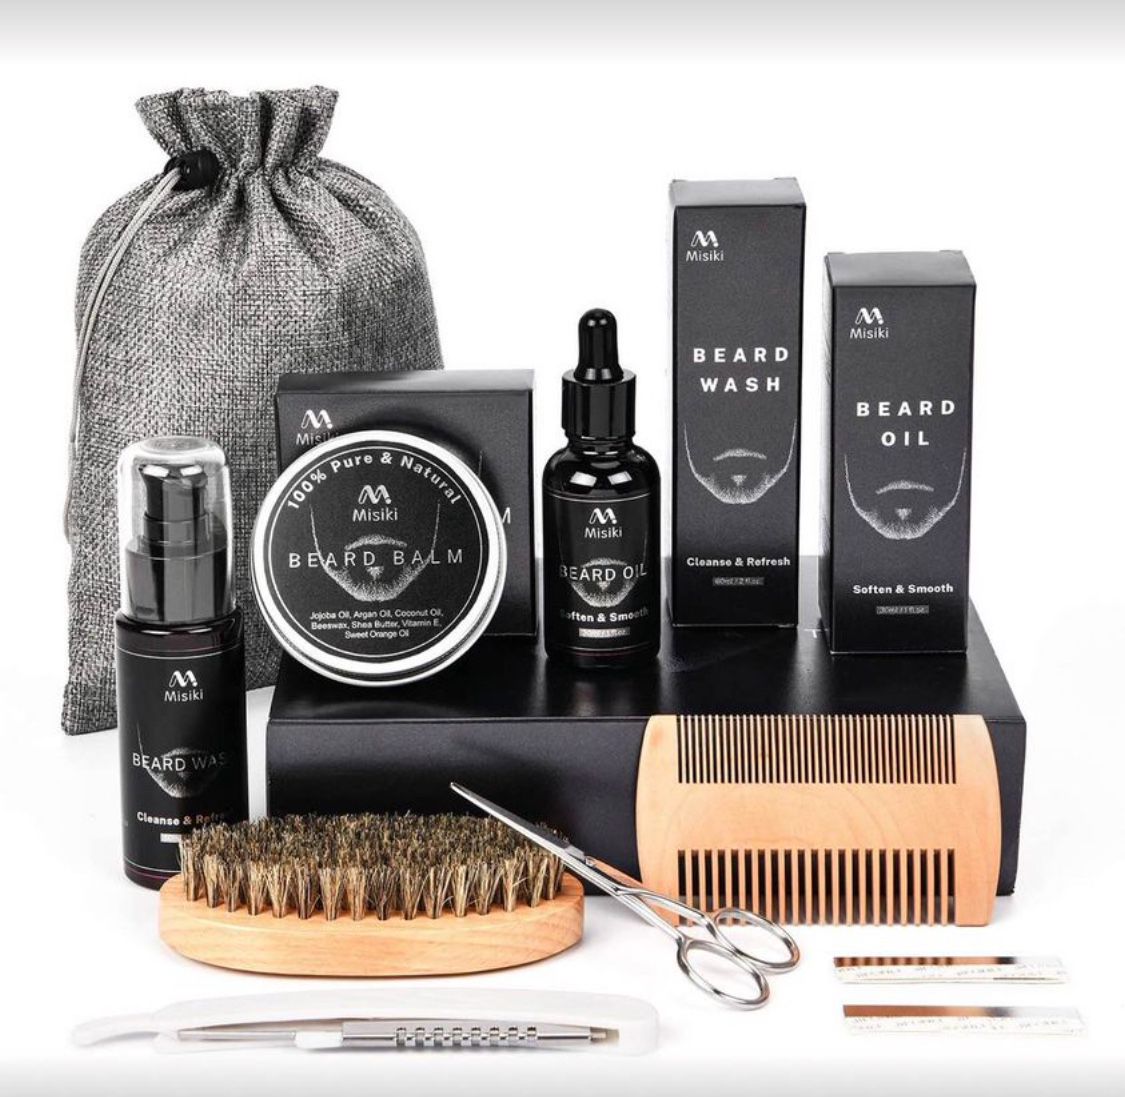 New! Beard Kit for Men Grooming & Care, with Trimming Tool Set, Natural Beard Care Growth Oil & Wash, Brush, Comb, Scissors & Storage Bag